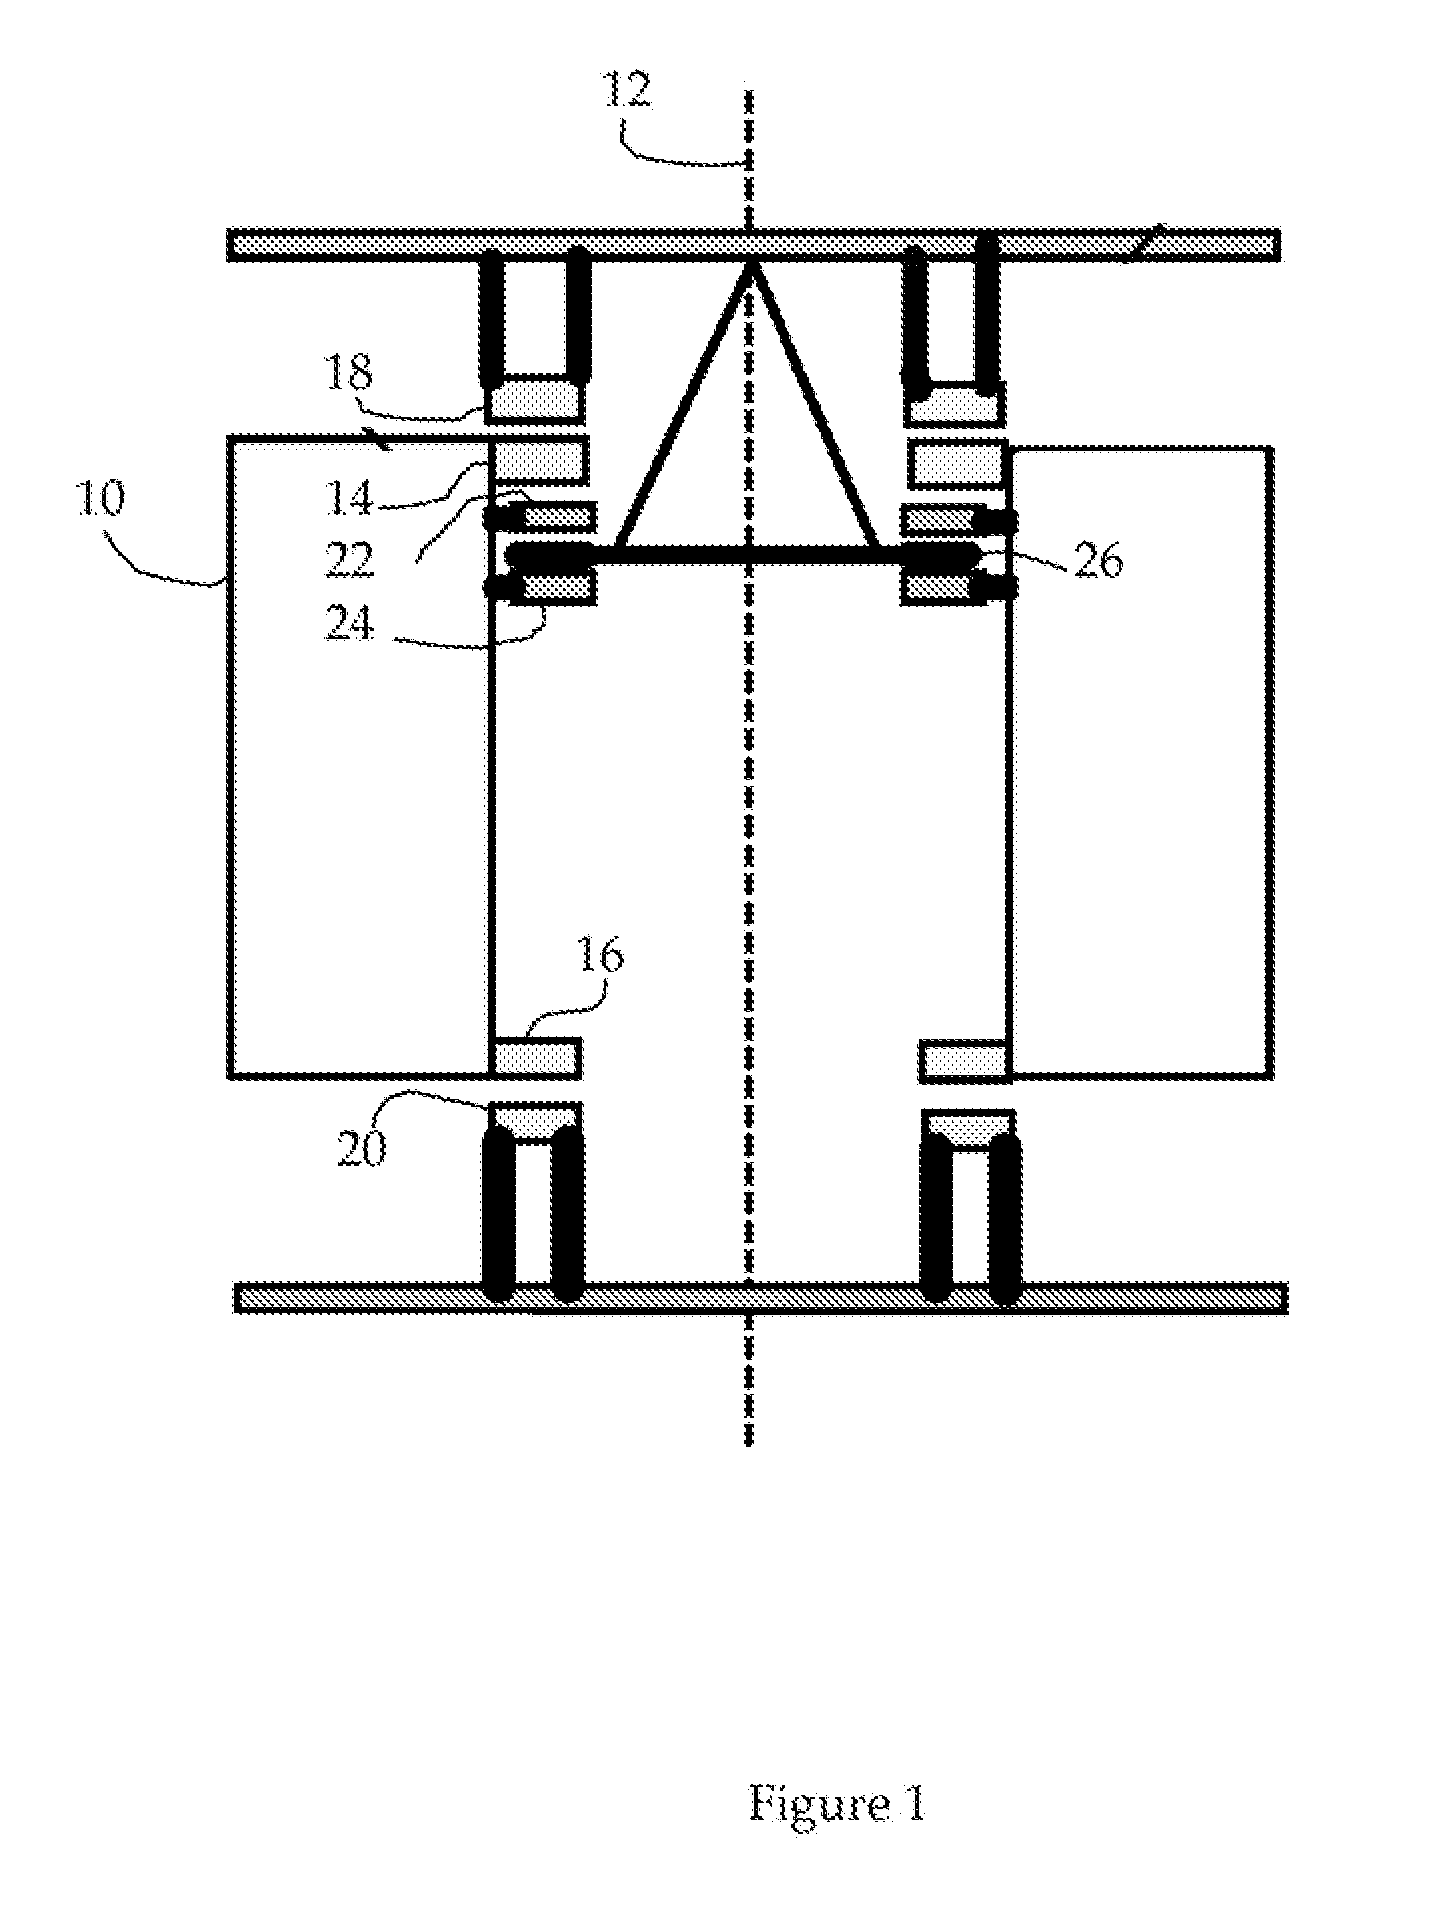 Passive magnetic bearing system